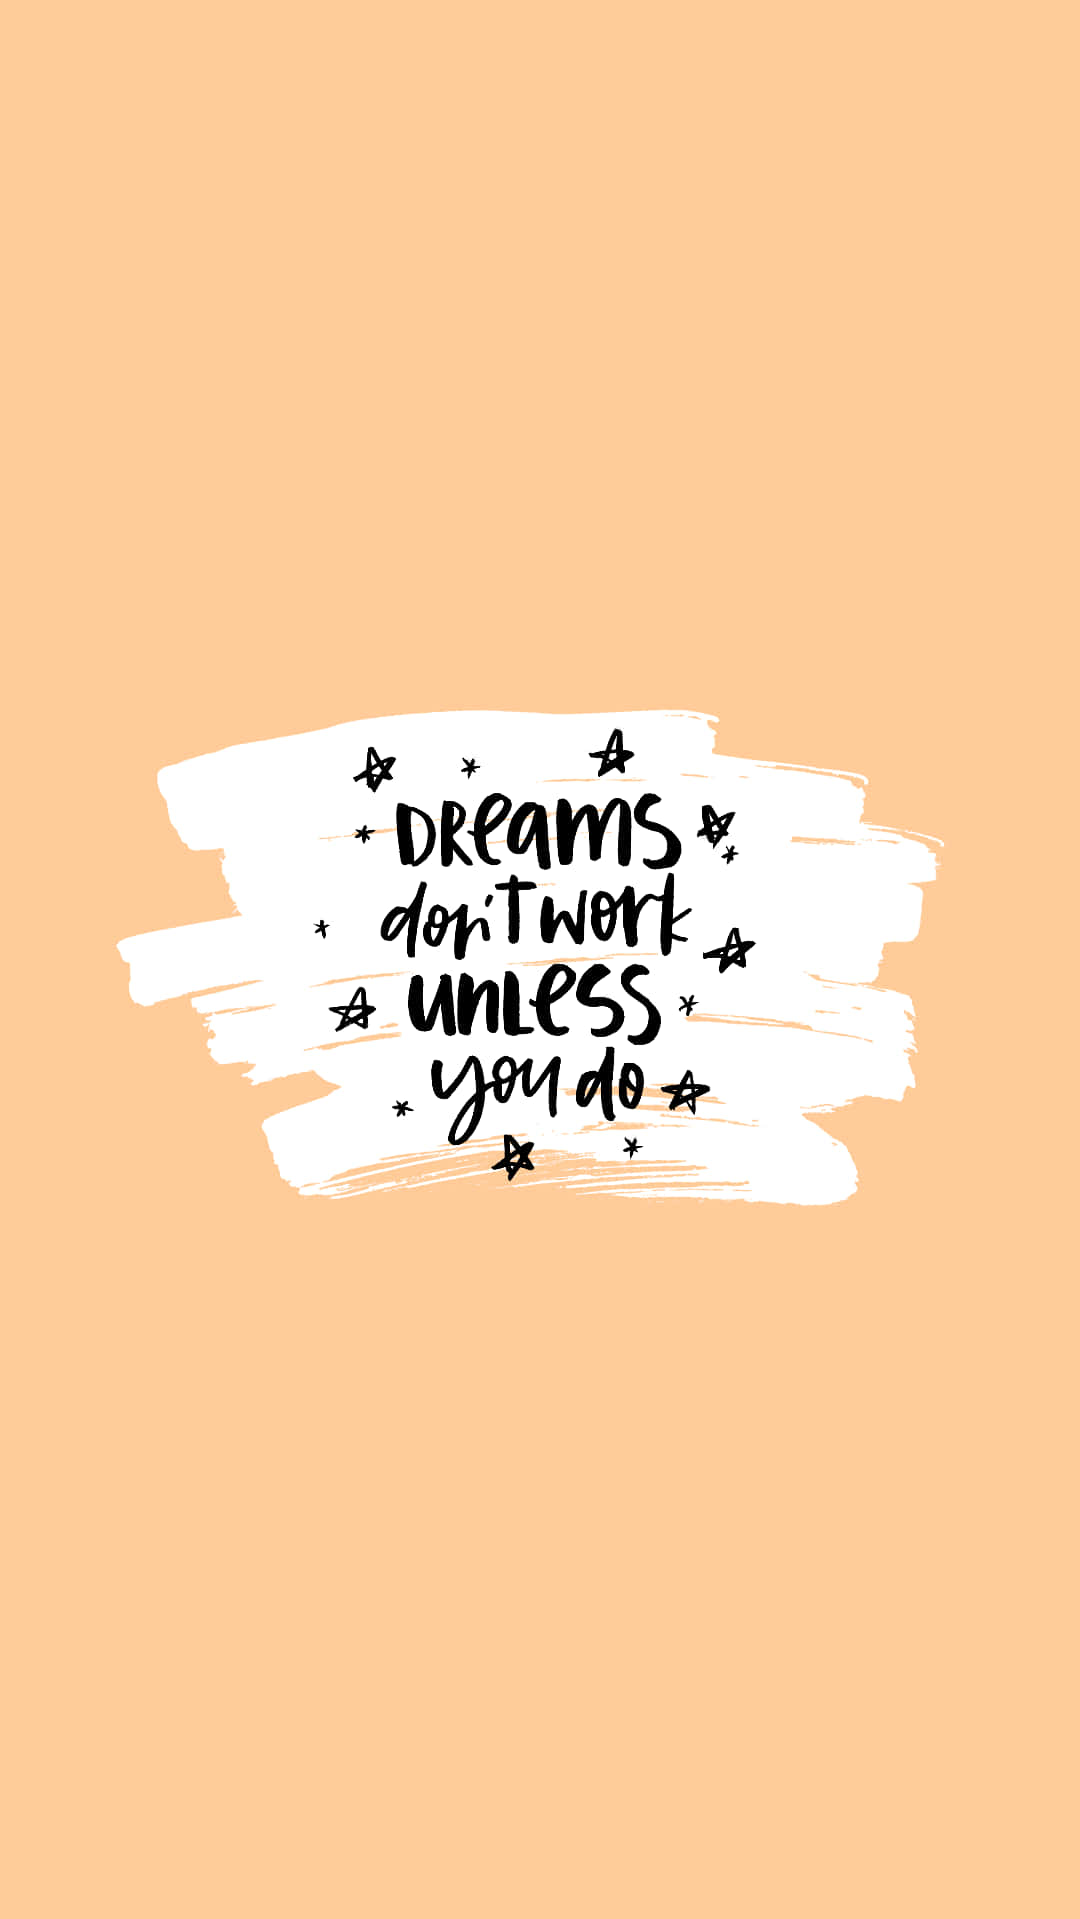 Dreams Don't Work Quotes Tumblr